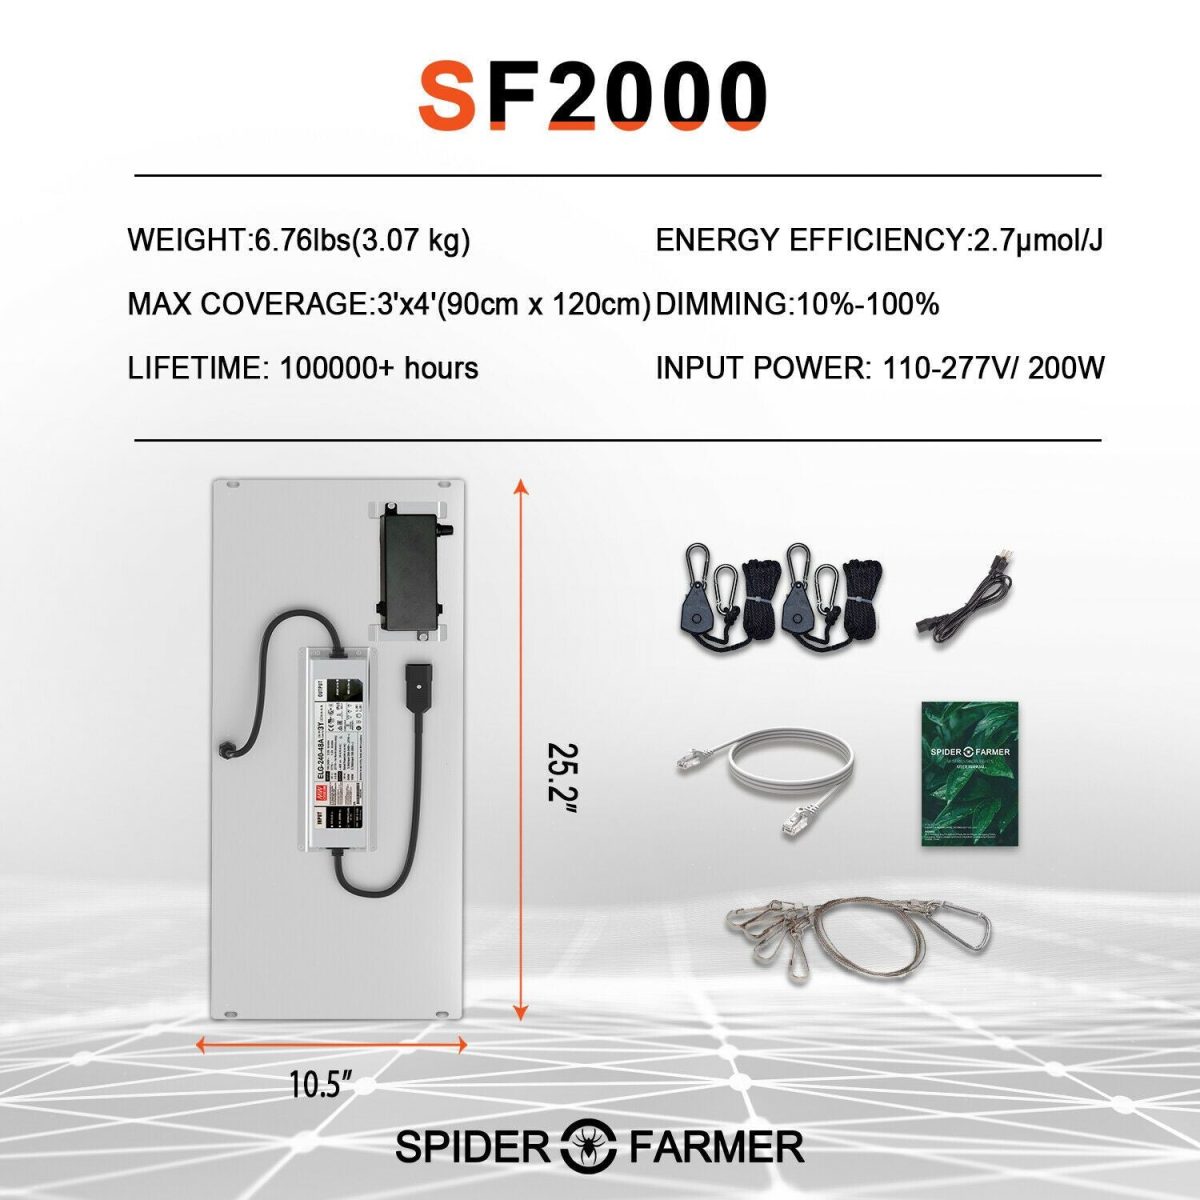 Packing list & light size of SF2000 LED